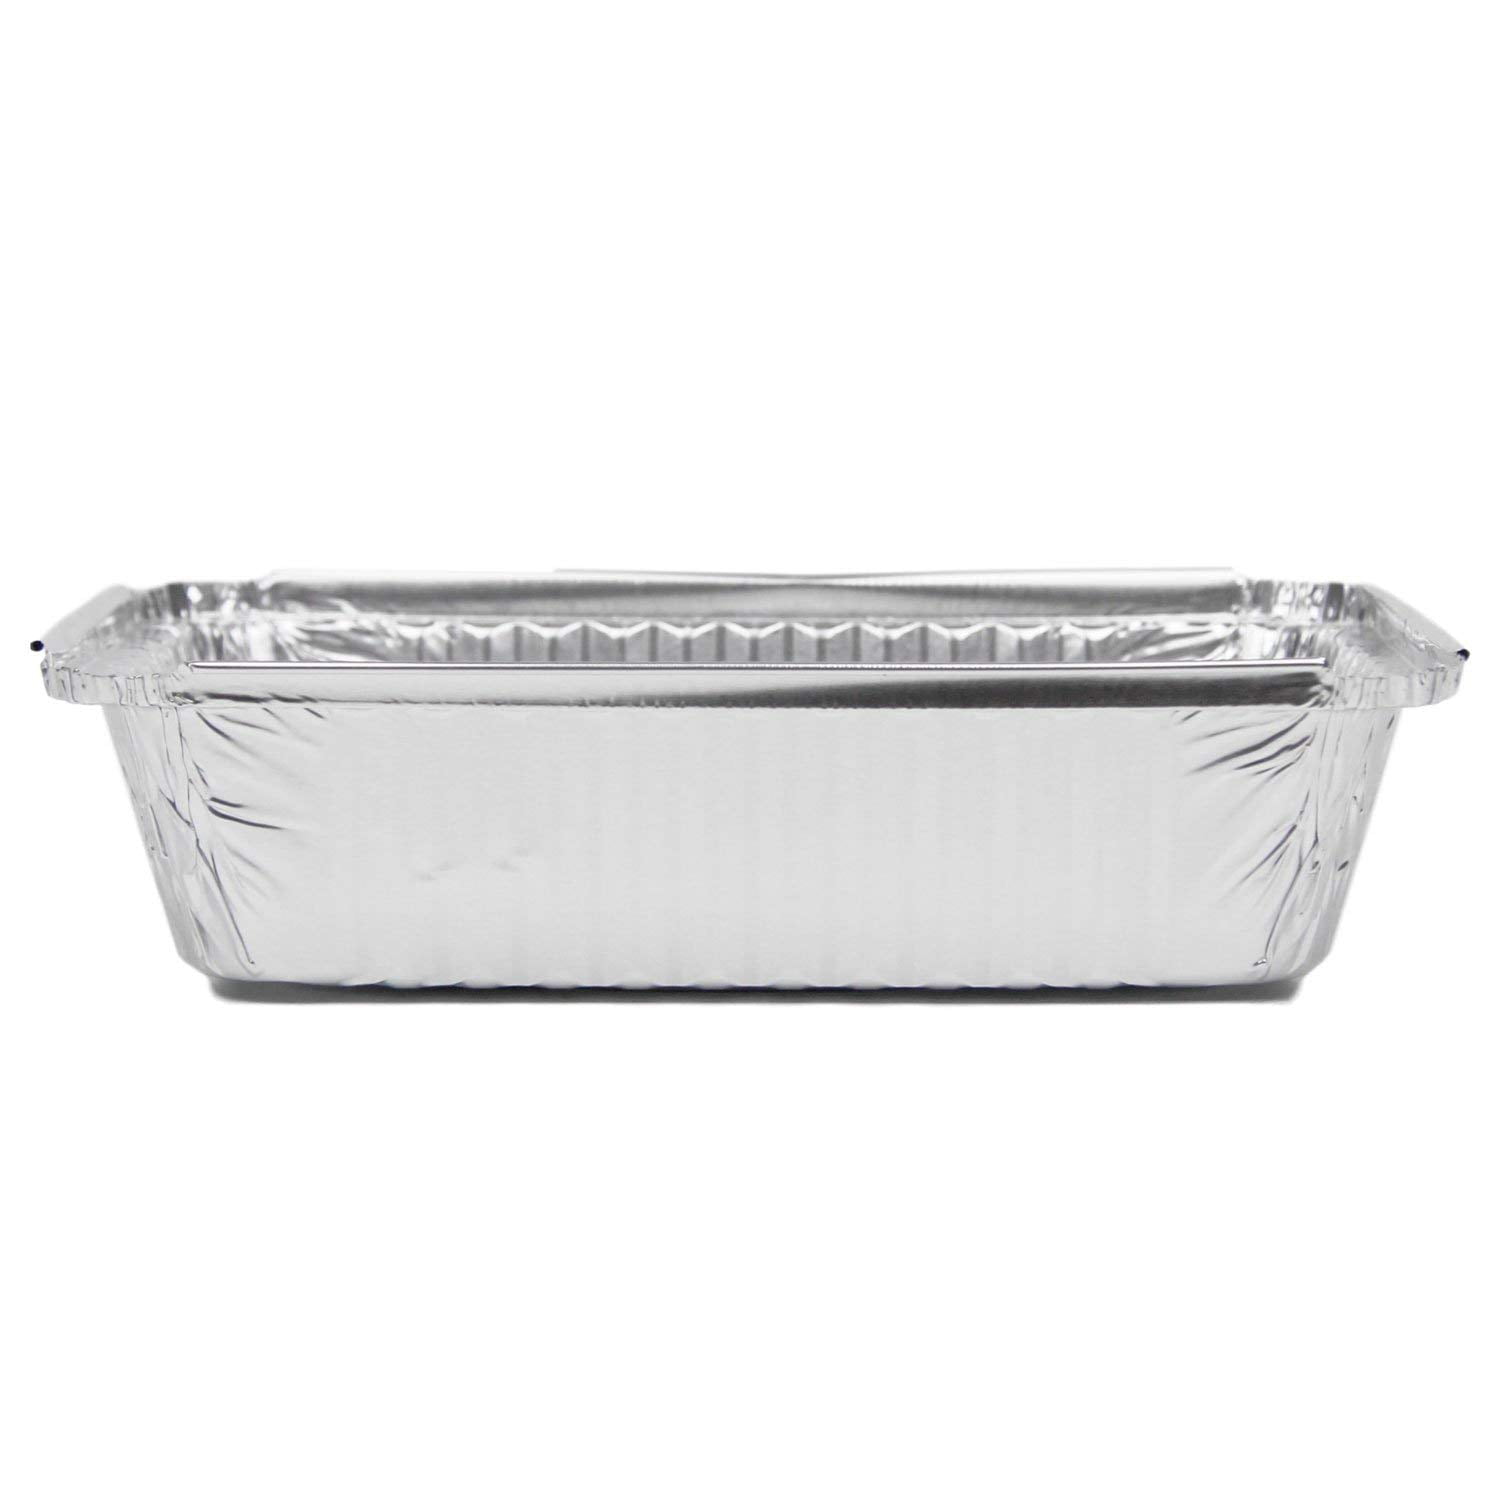 Rectangular 4 lb 64 oz 12.5 x 8.5 x 2 25 inch Disposable Aluminum Foil Pan Roasting Baking Tray Containers, Cake Cassarole Hot Cold Food Freezer Oven